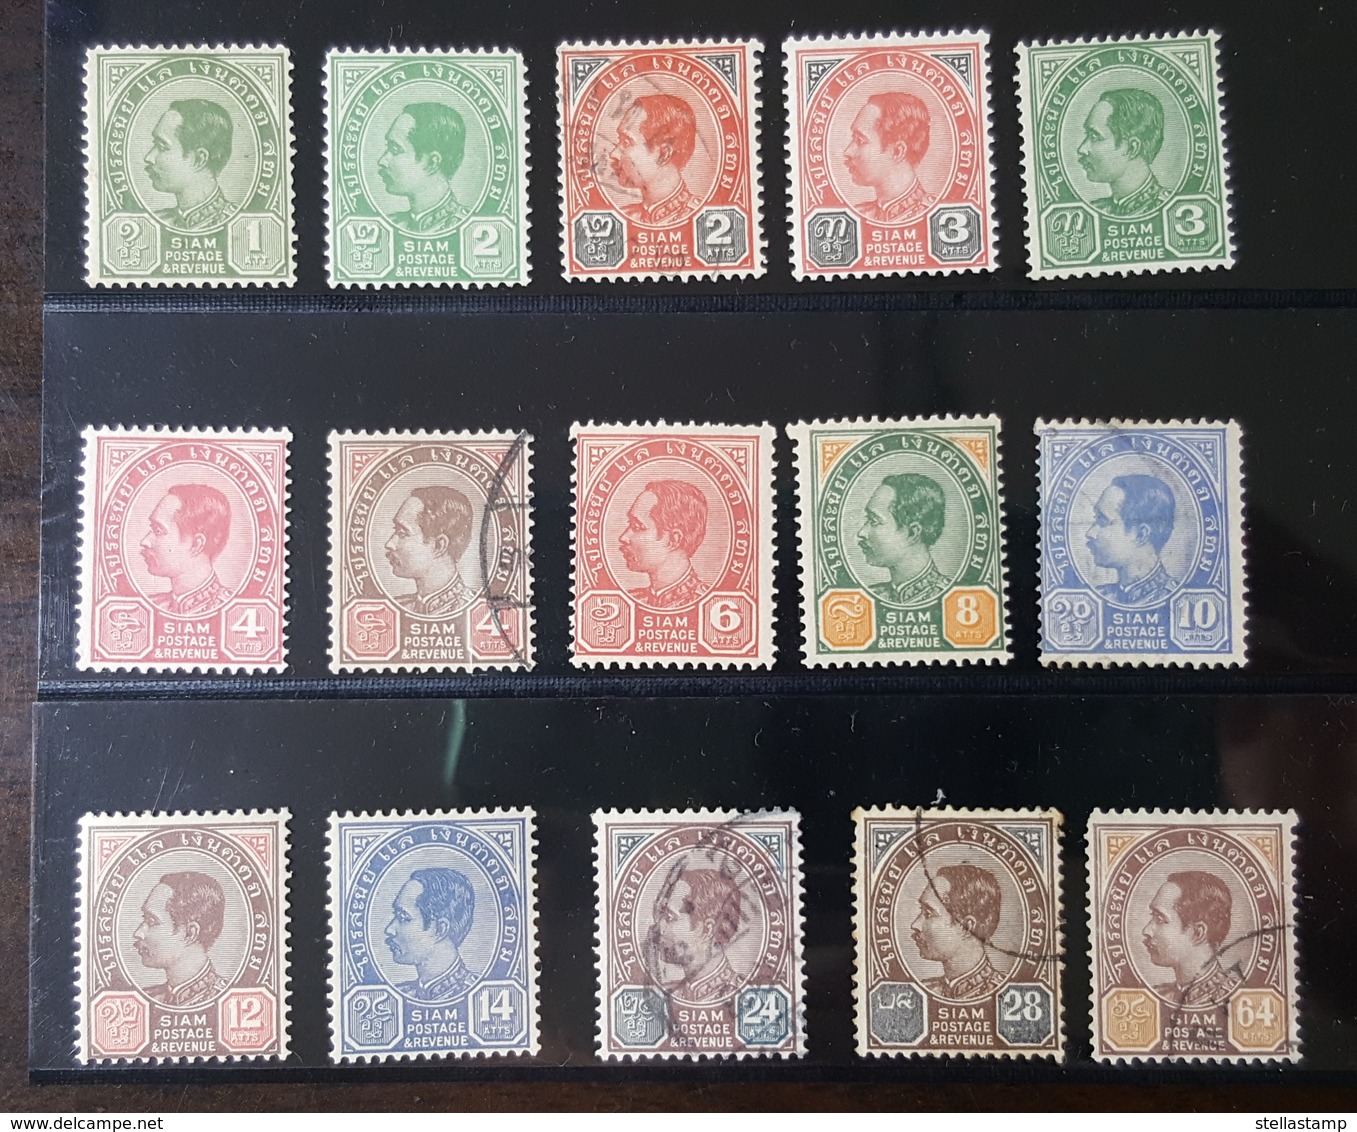 Thailand Stamp King Rama 5 Third Issue Used+Unused (Missing 1 Atts Type2) - Thailand